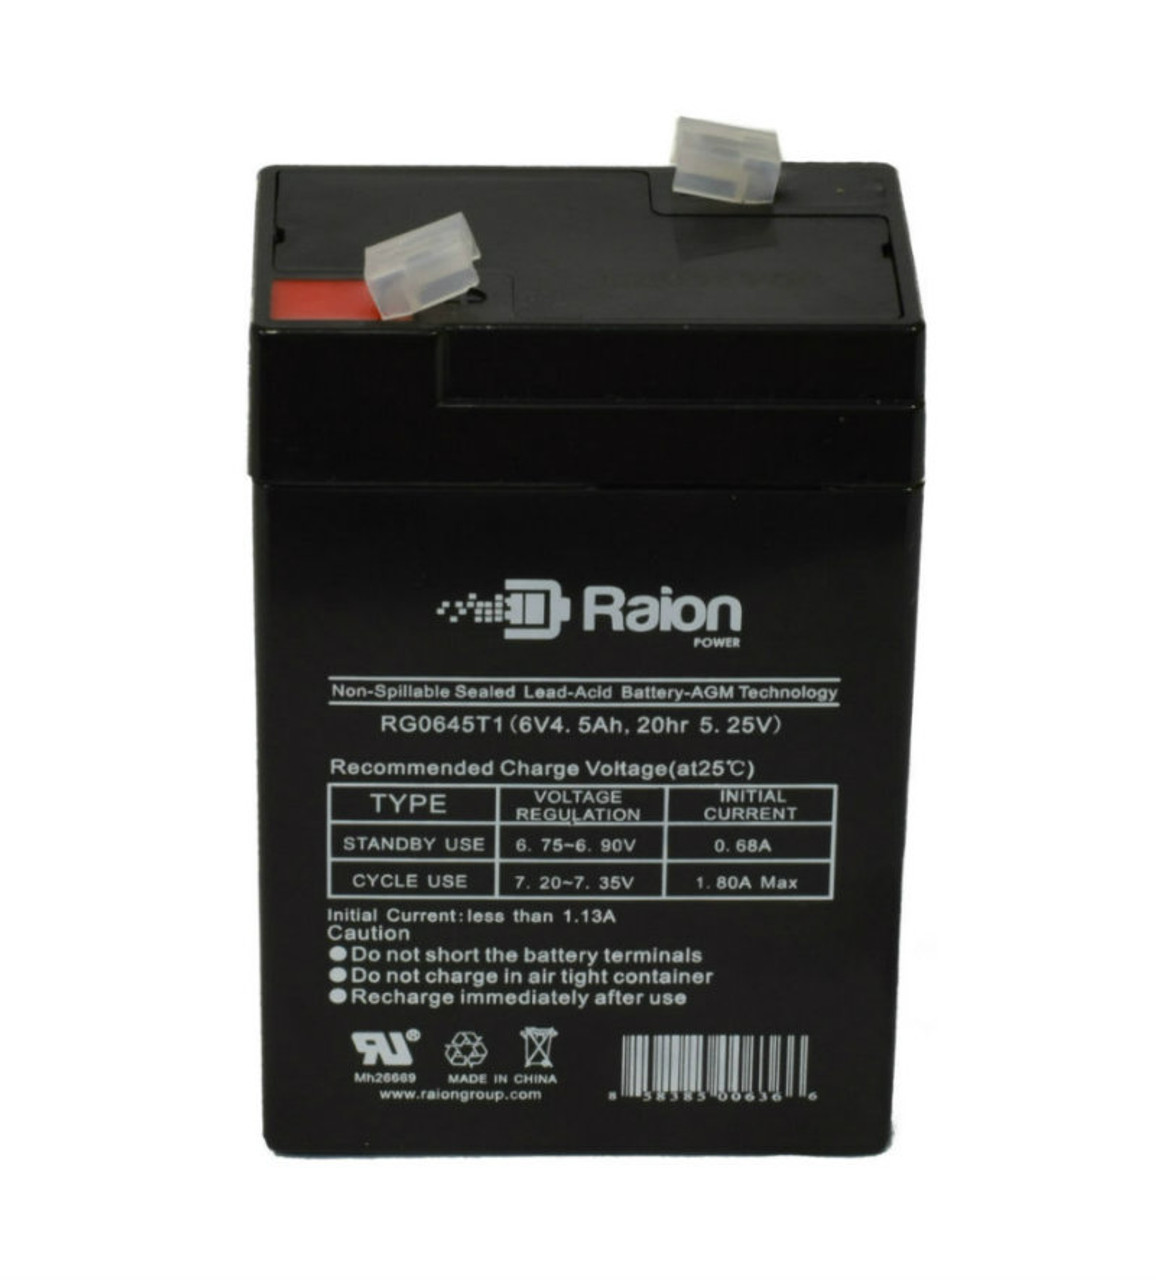 Raion Power RG0645T1 Replacement Battery Cartridge for Vision CP640LE